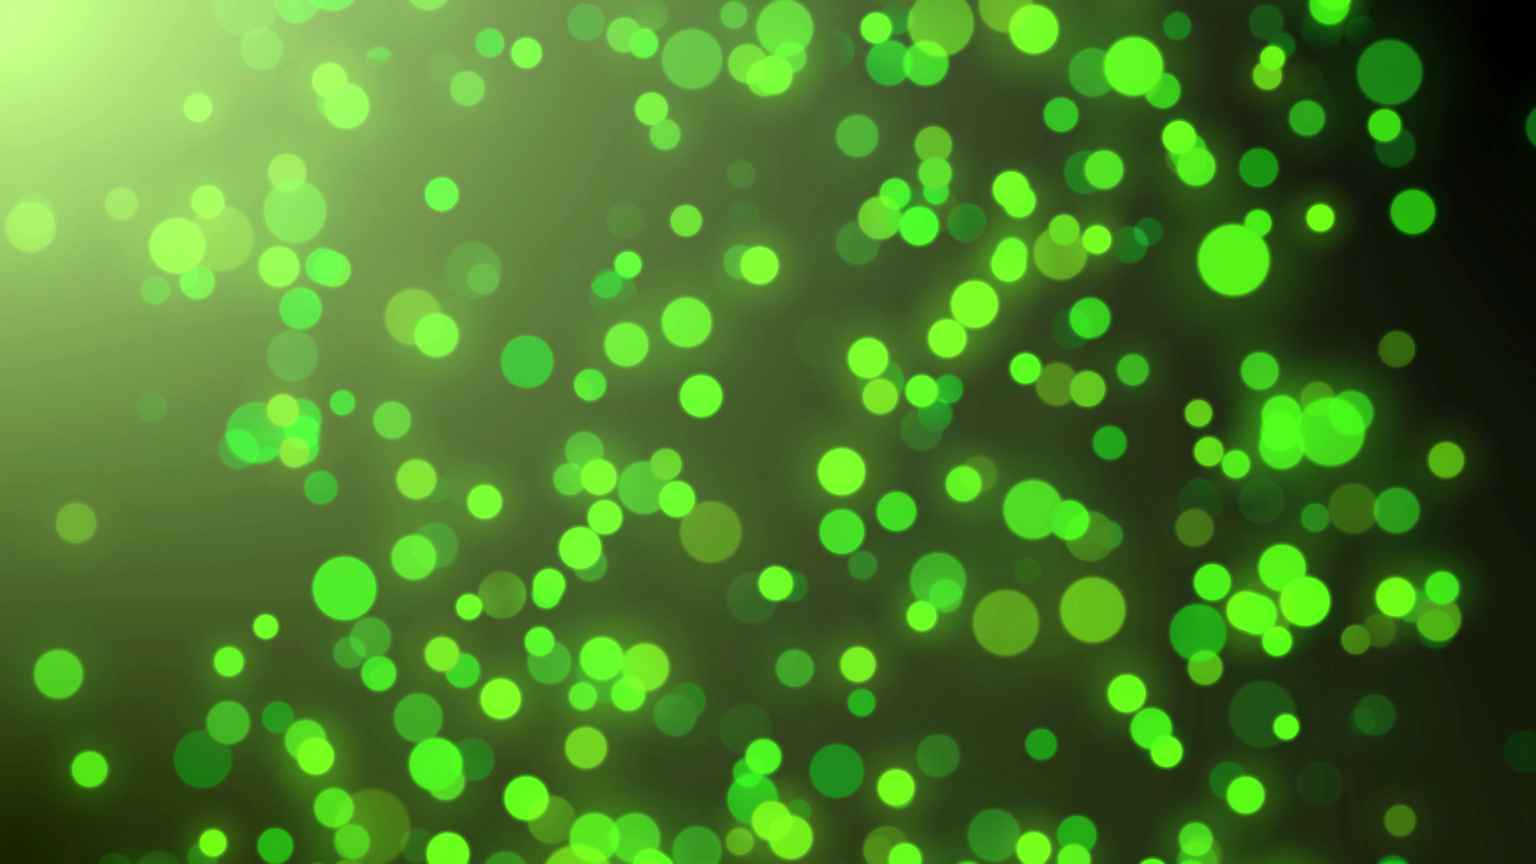 4K Glowing Green Particles Looped Motion Background || VFX Free To Use Screensaver